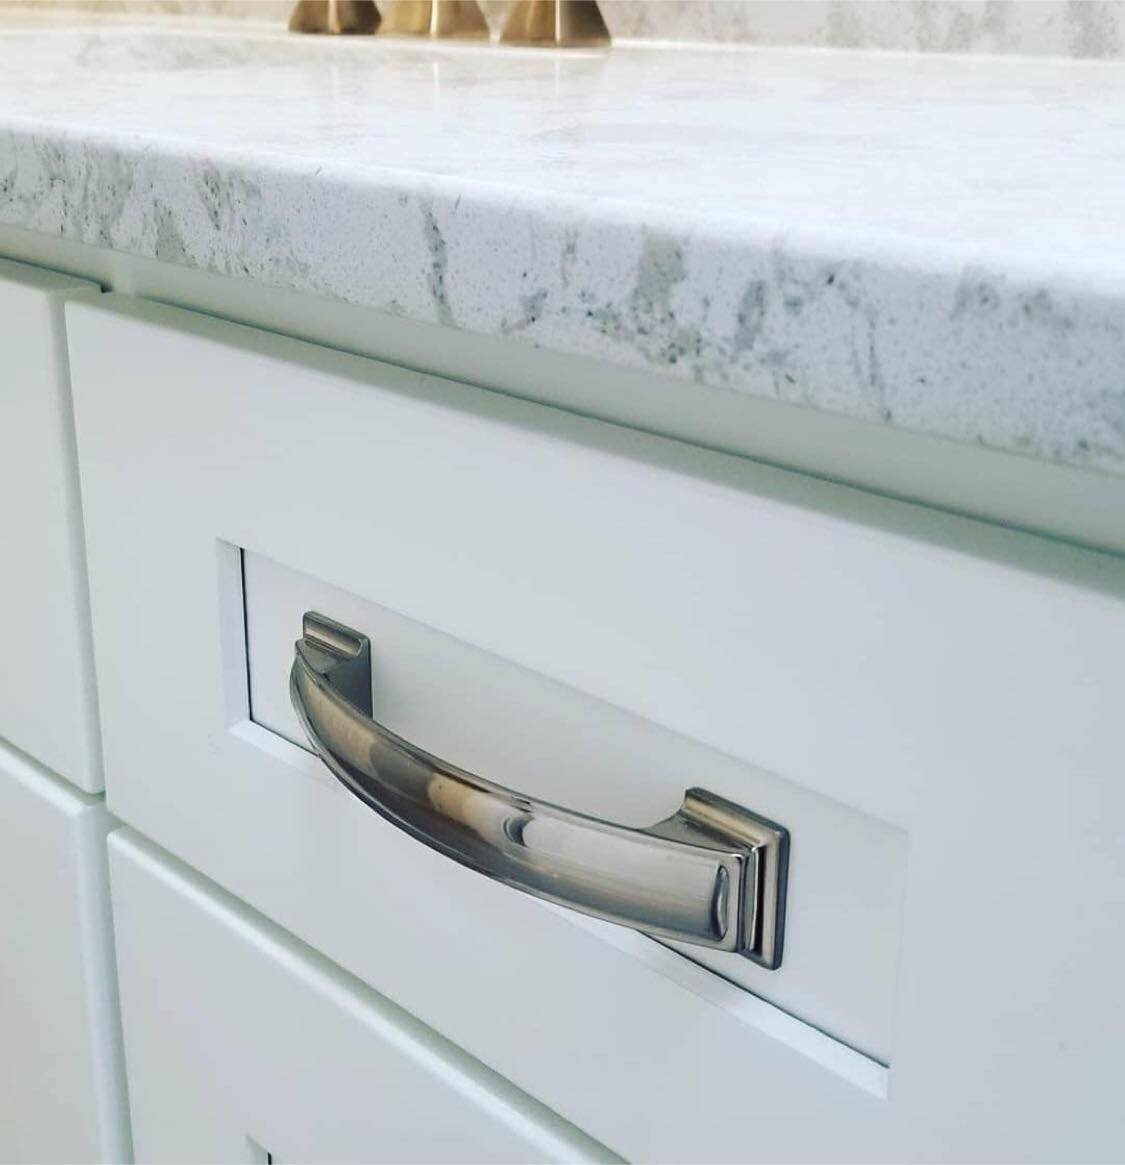 Finding the right hardware for your cabinetry doesn't have to be complicated, and we have samples in our showroom from Hardware Resources! We find it very helpful to hold up different options next to the cabinet  samples to find the perfect one. 

Re